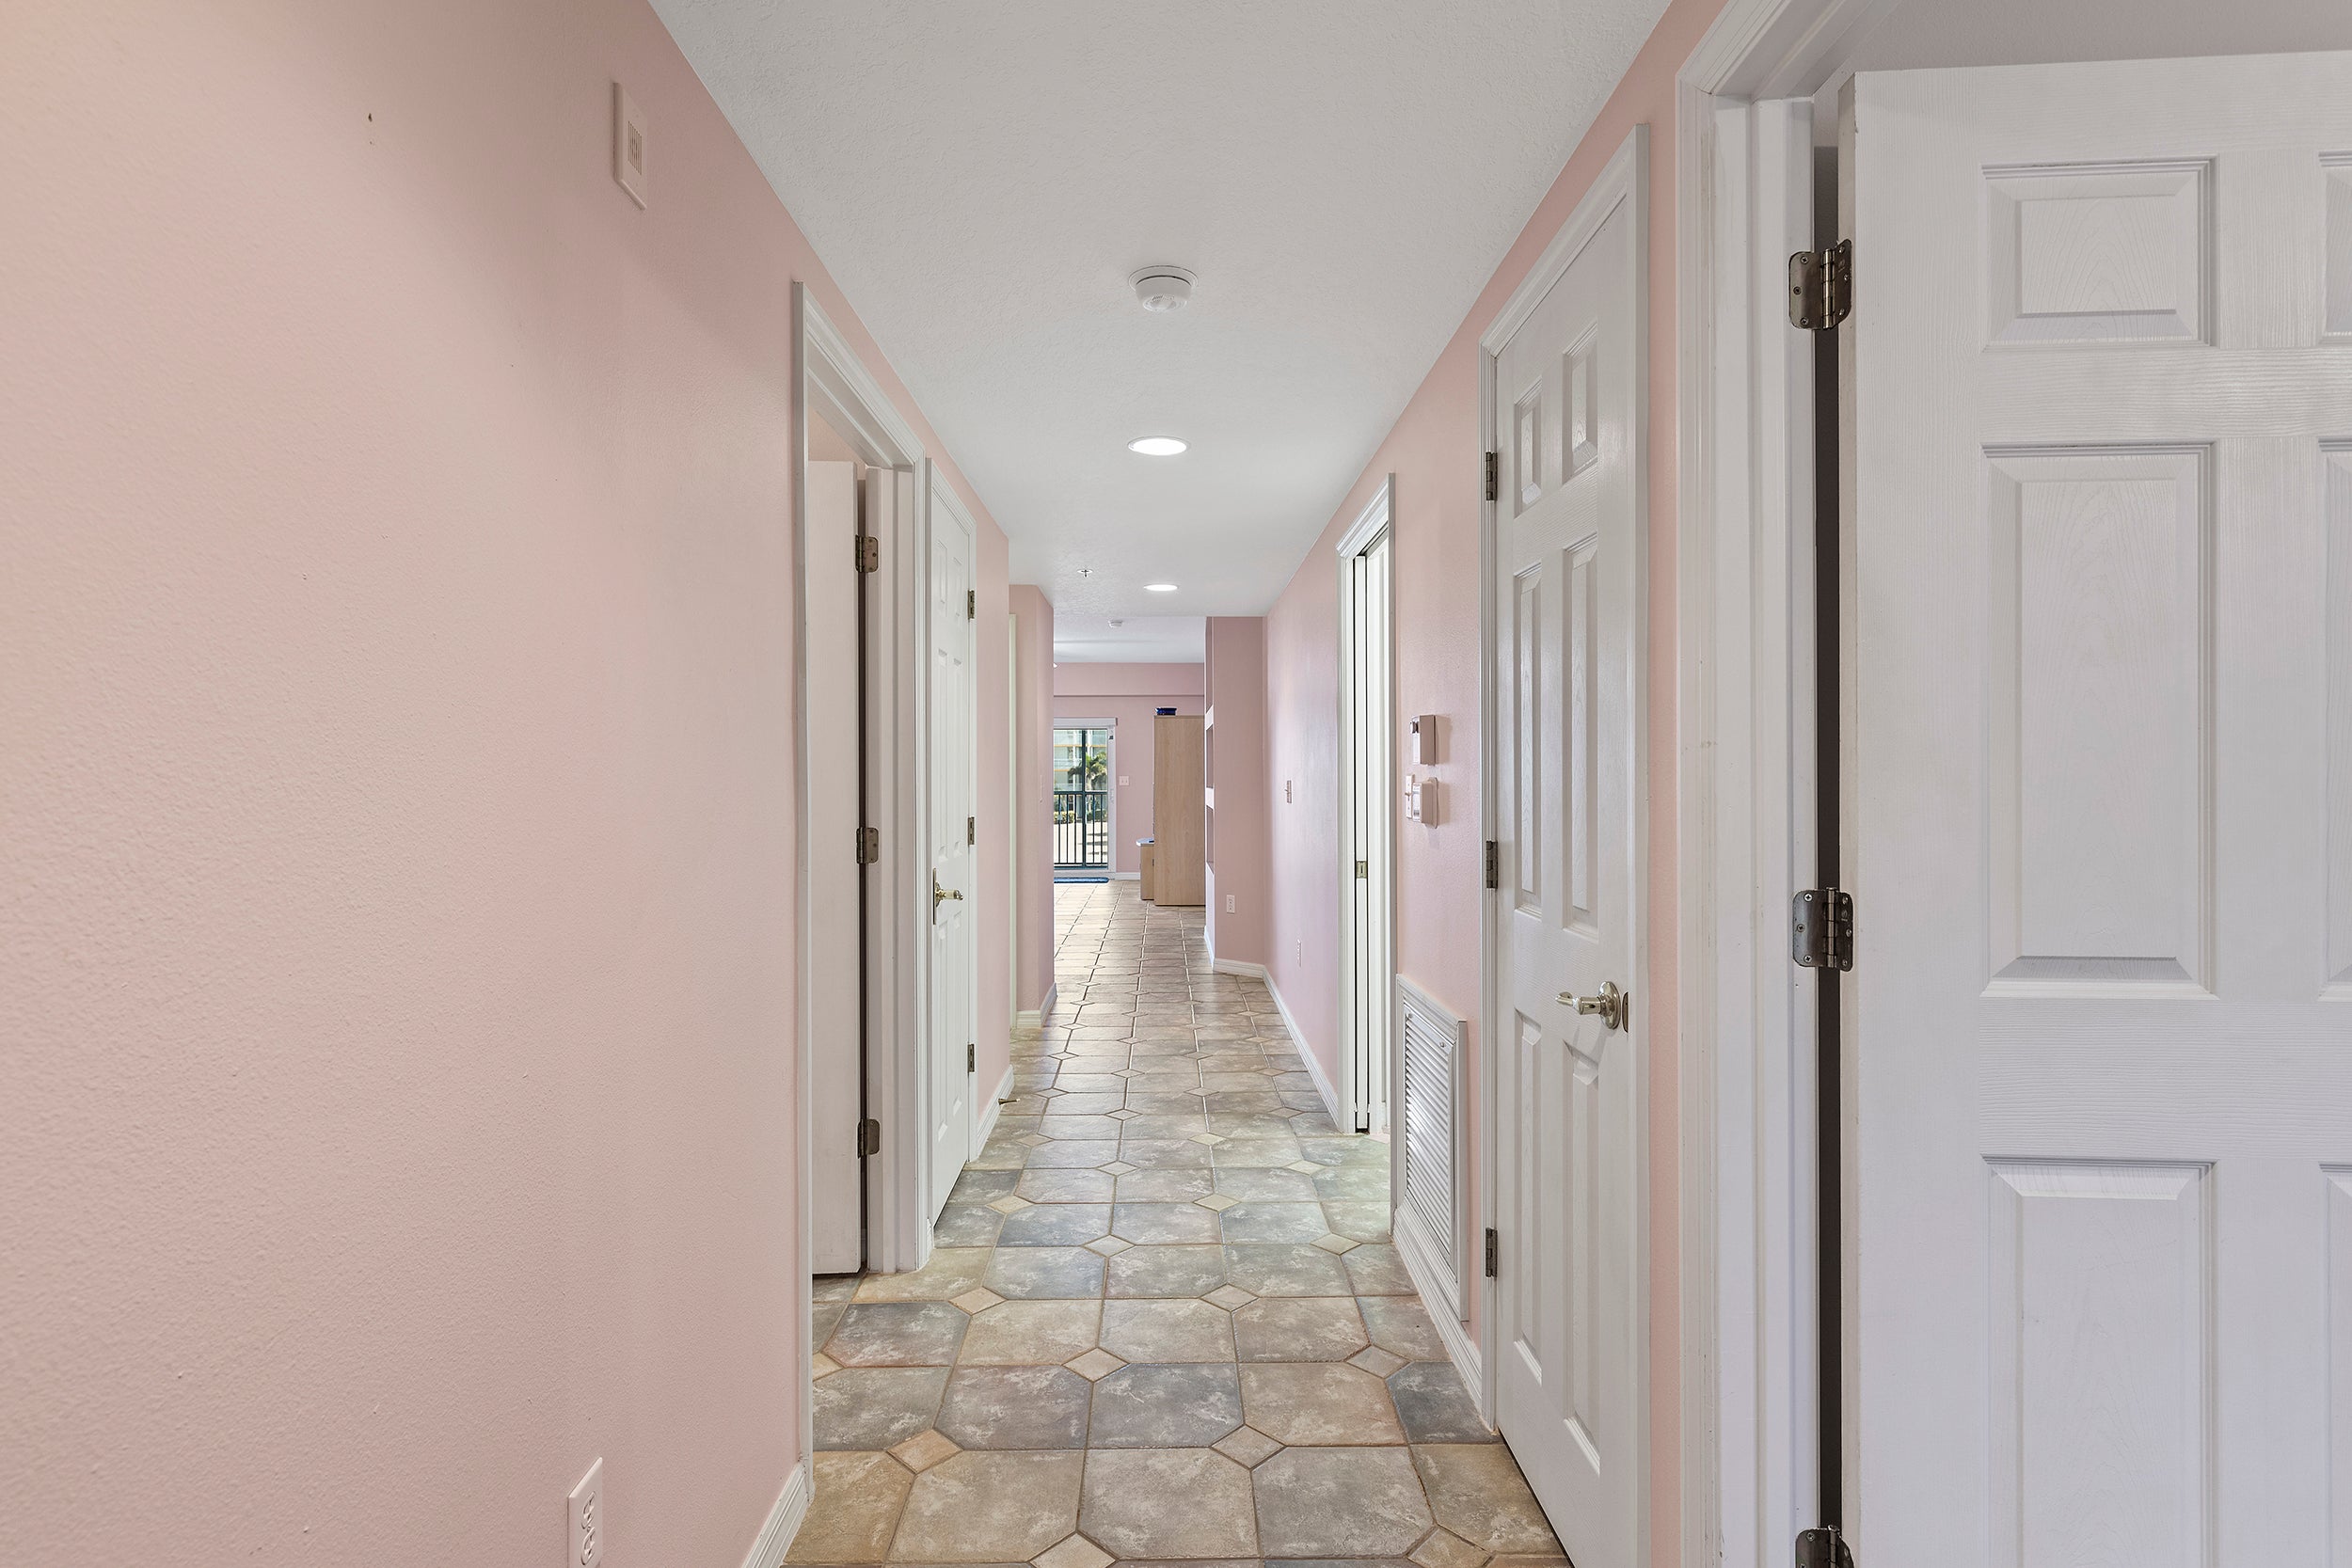 Hallway to Bedrooms and Main Living Area